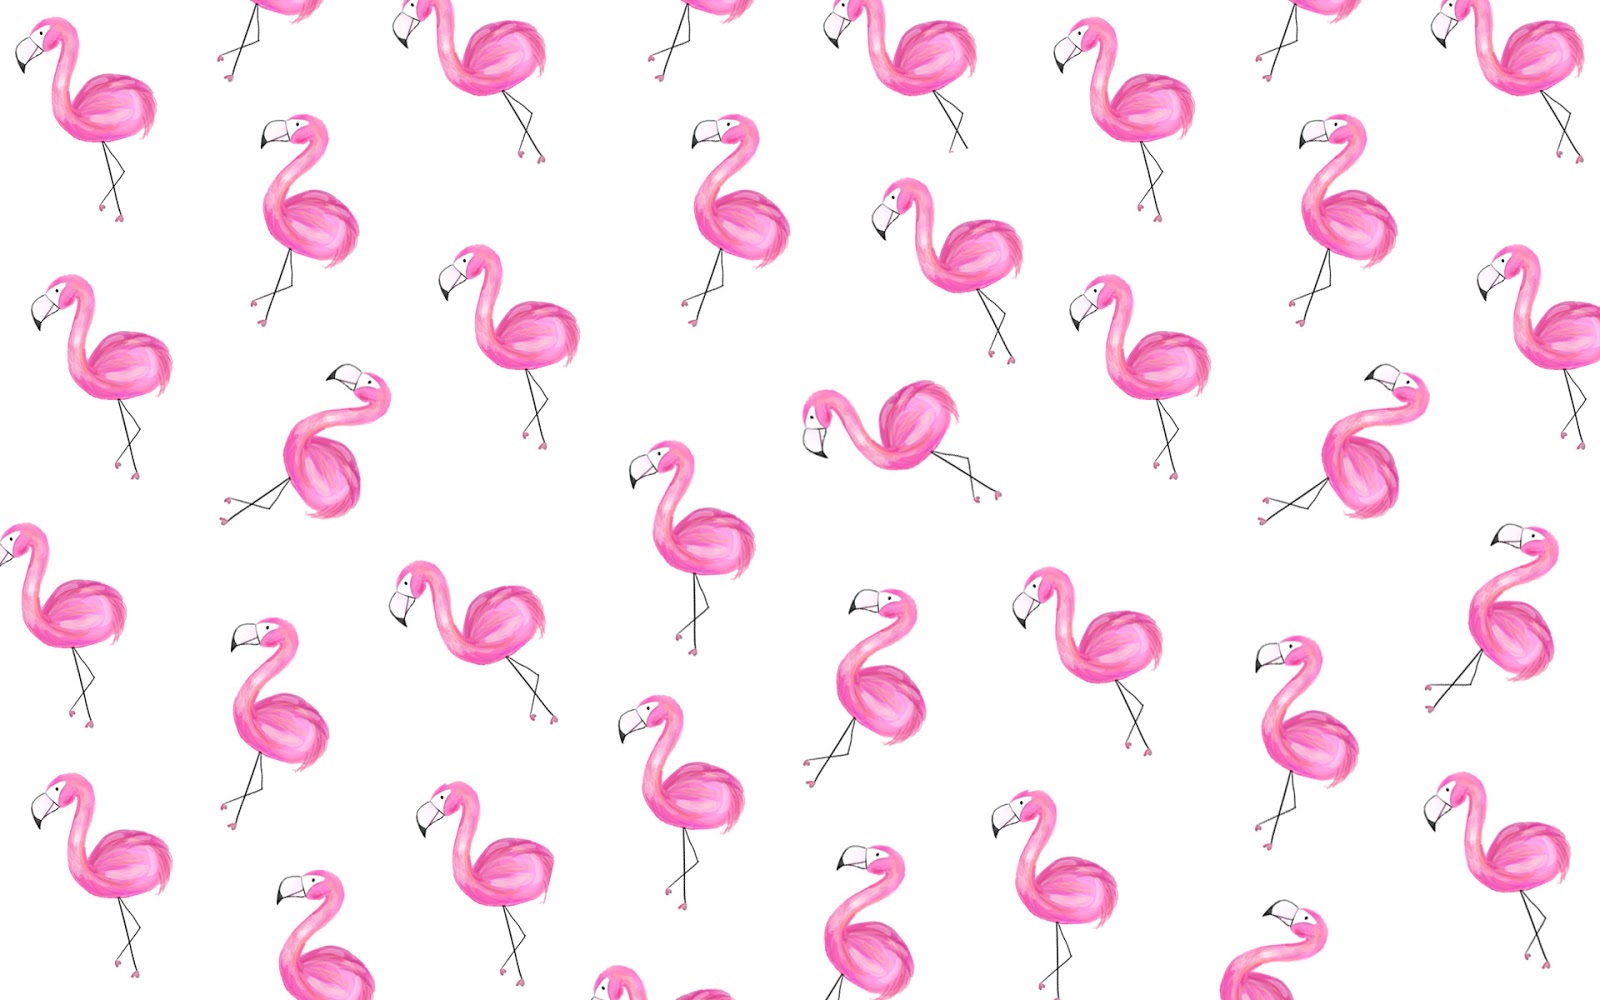 40+ Free Girly Desktop Wallpapers - The Pretty City Girl